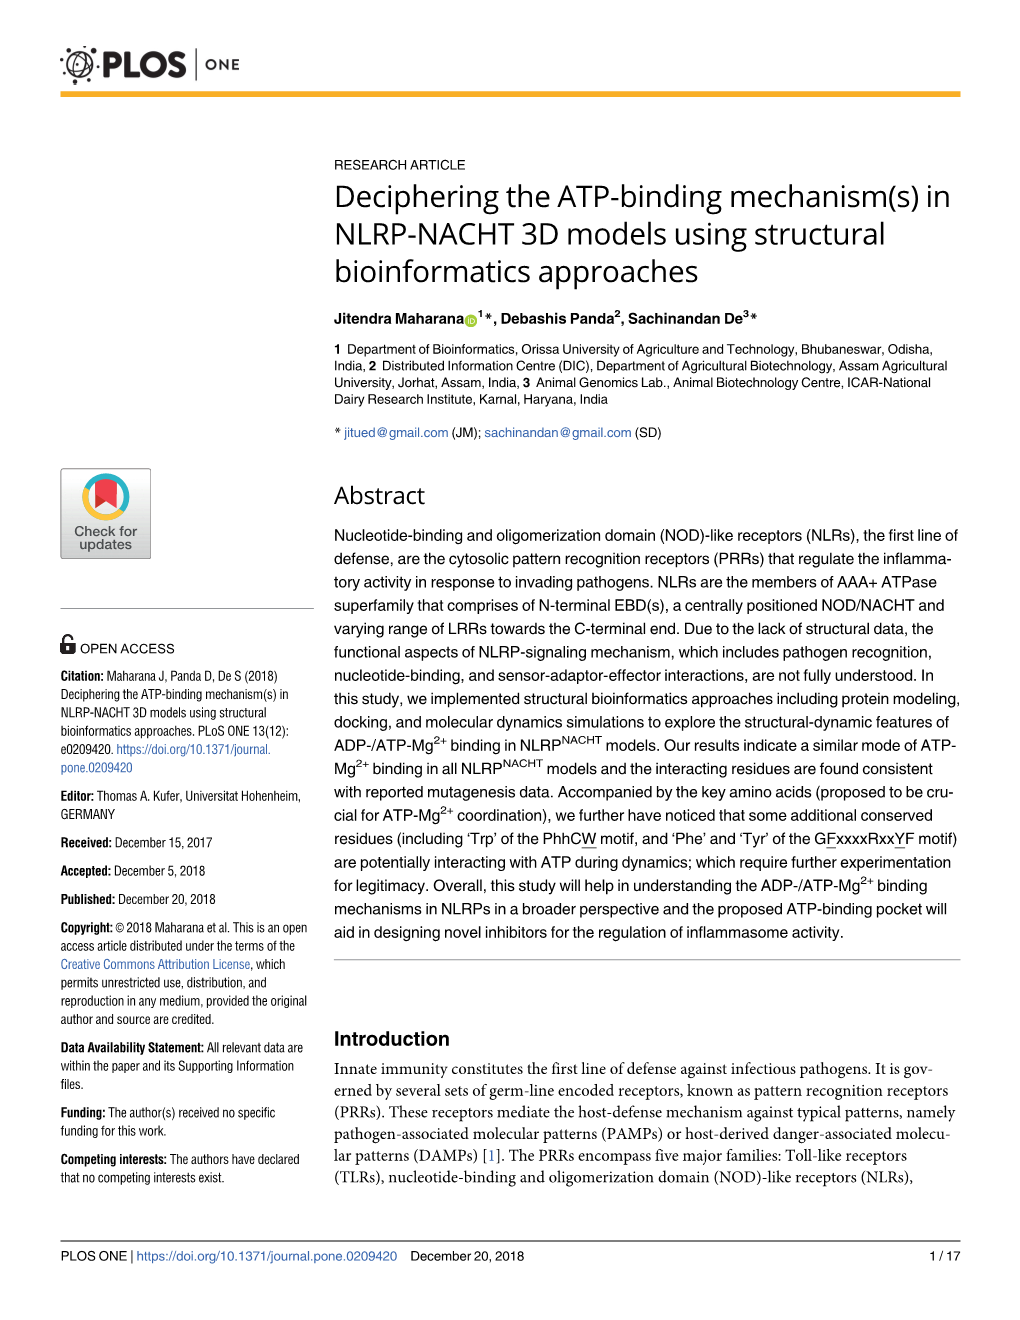 Deciphering the ATP-Binding Mechanism(S) in NLRP-NACHT 3D Models Using Structural Bioinformatics Approaches